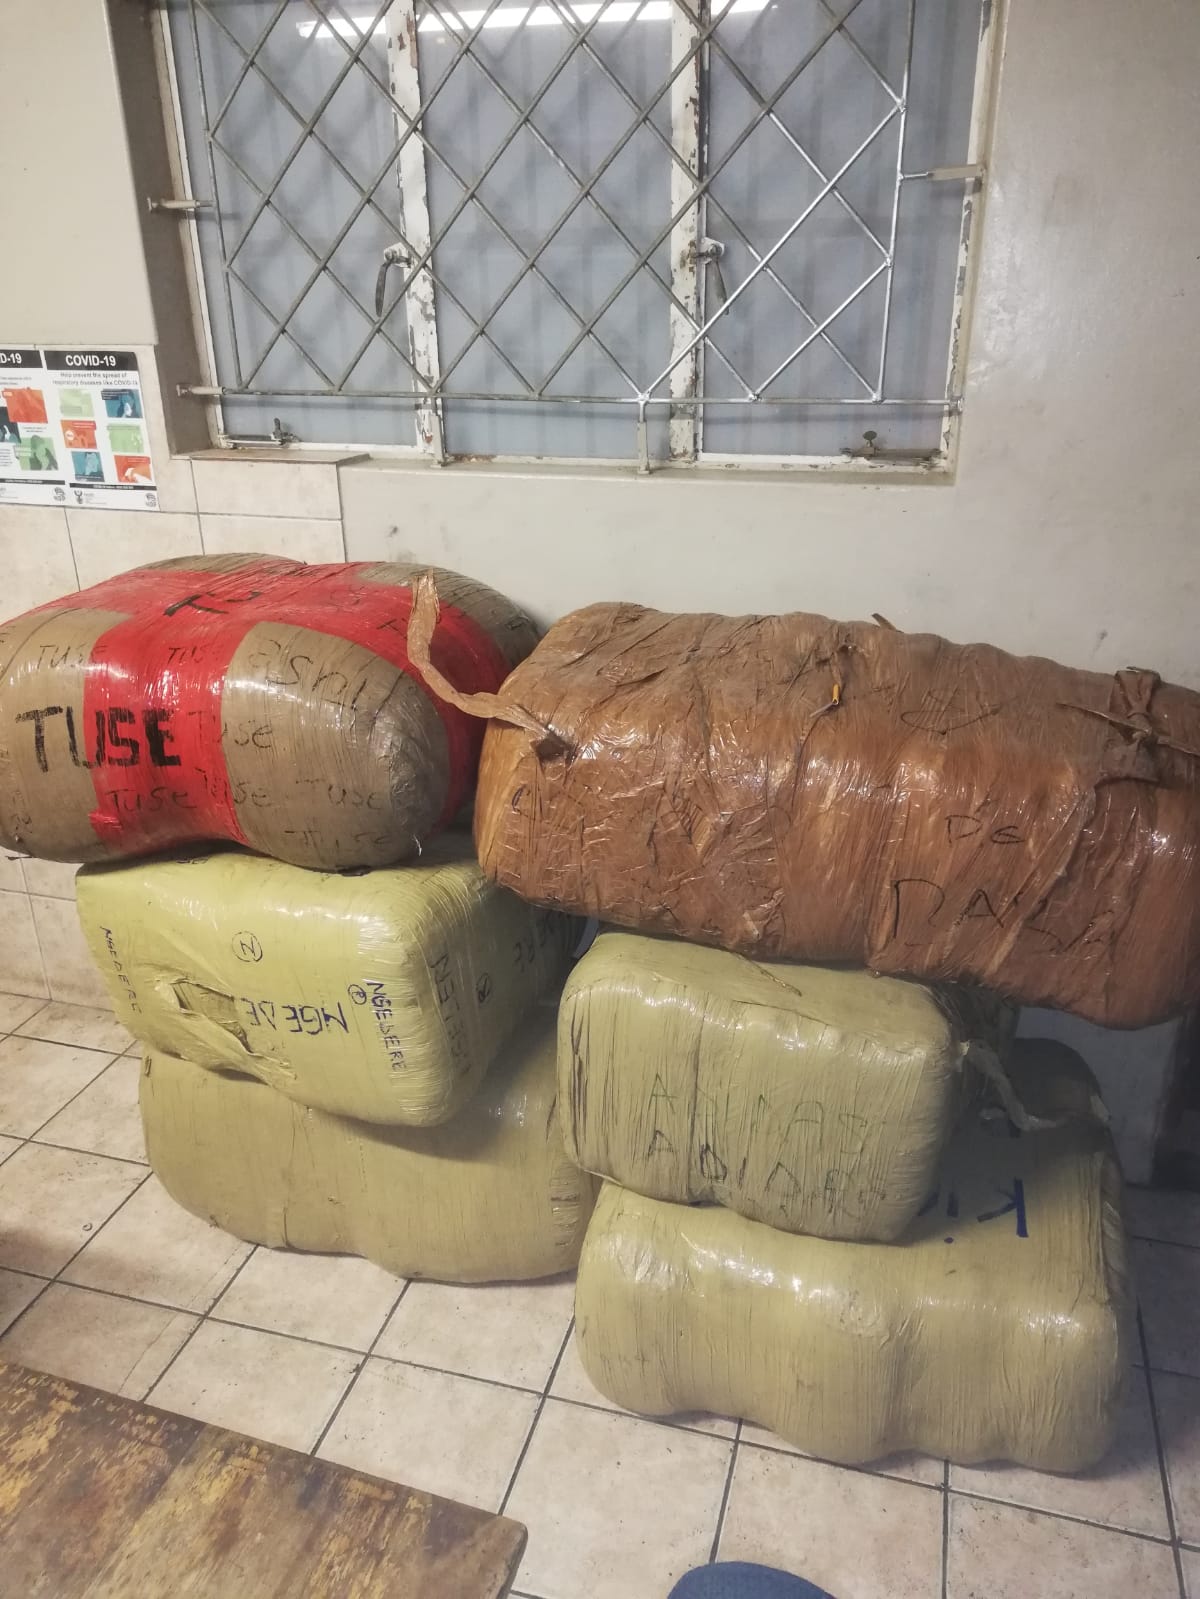 Additional information: Six more bales of dagga found in Swartkops